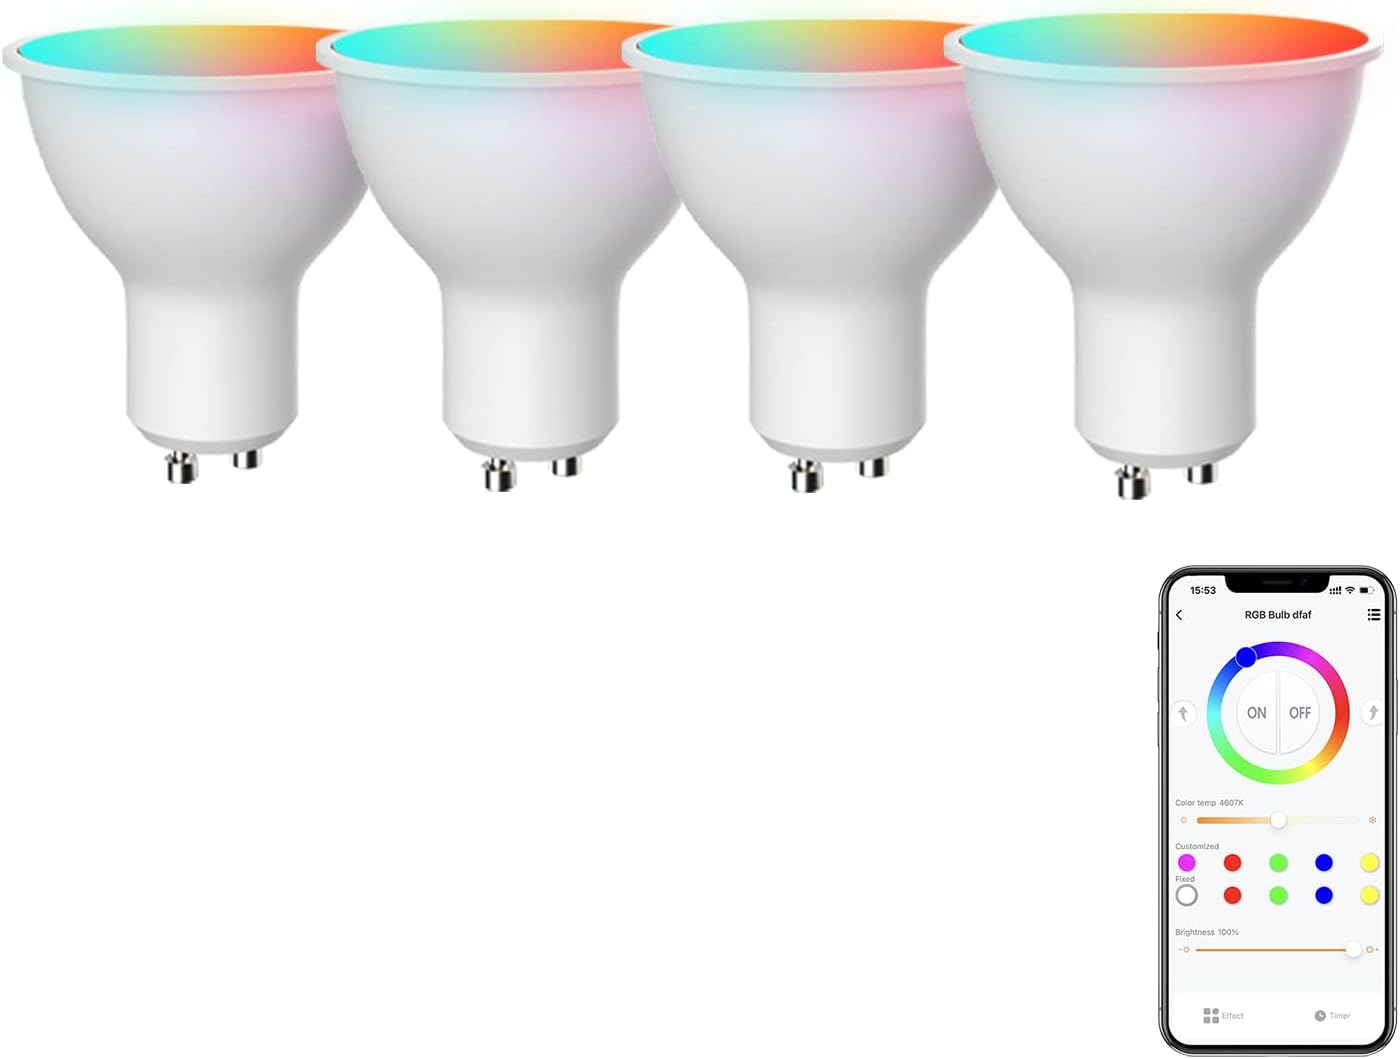 Broadlink GU10 Smart Bulbs, Color Changing 4.5W LED Track Light Bulbs with Music Sync, Fast Setup, Works with Alexa, Google Home, FastCon Mini Hub Required, 40W Halogen Equivalent (GU10-4P)